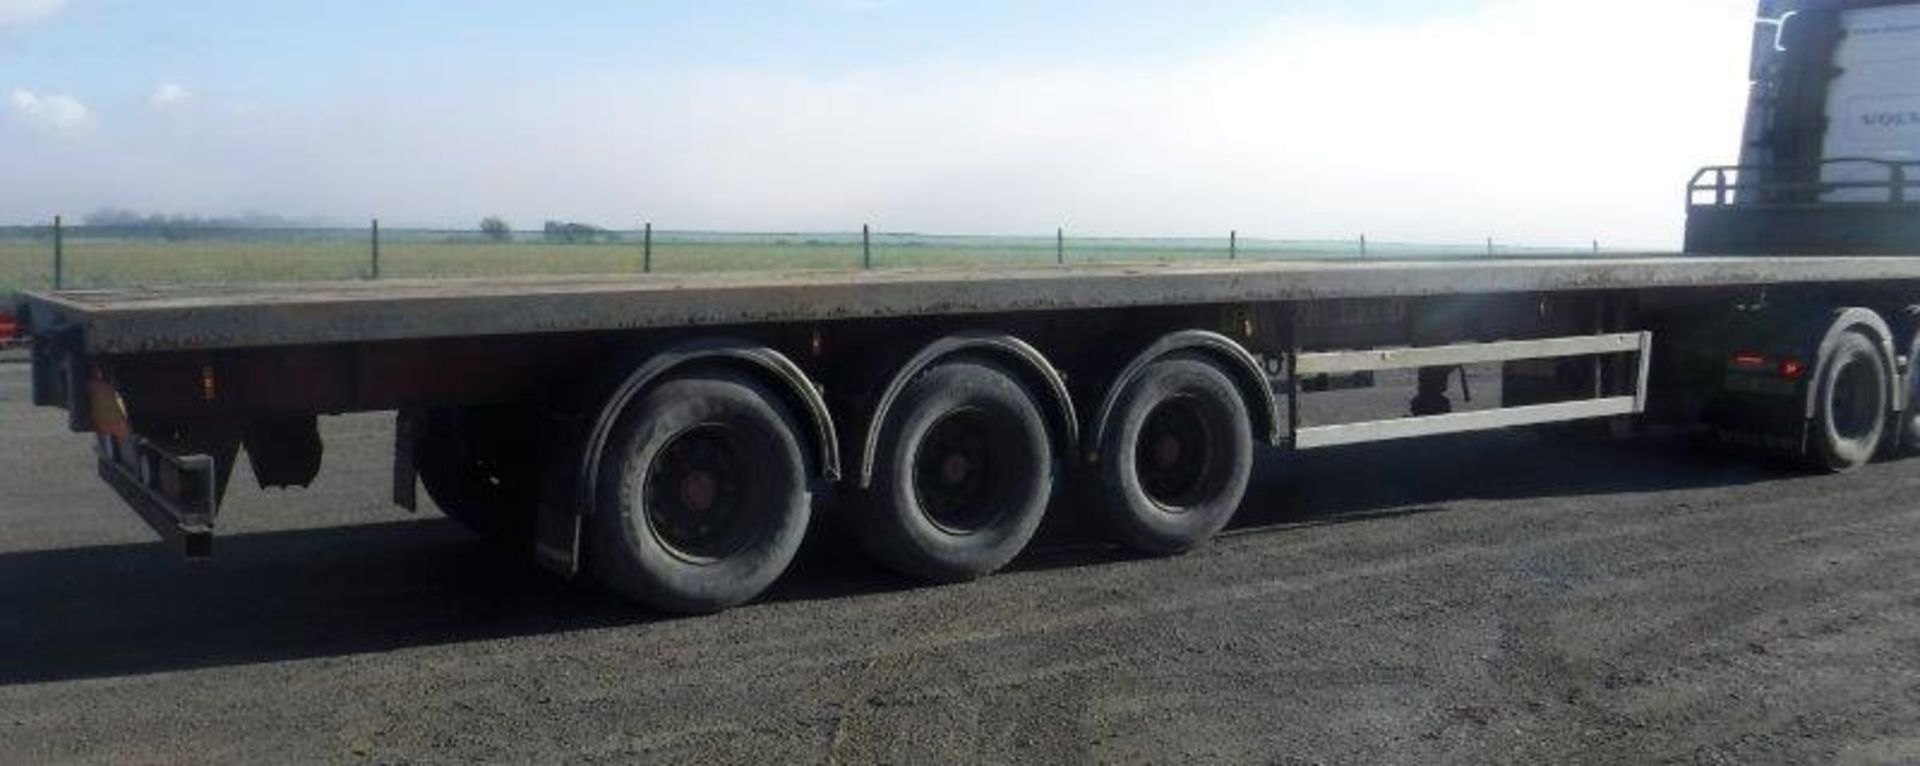 2005 MONTRACON triaxle flat bed trailer MOT April 2019 - Image 7 of 12